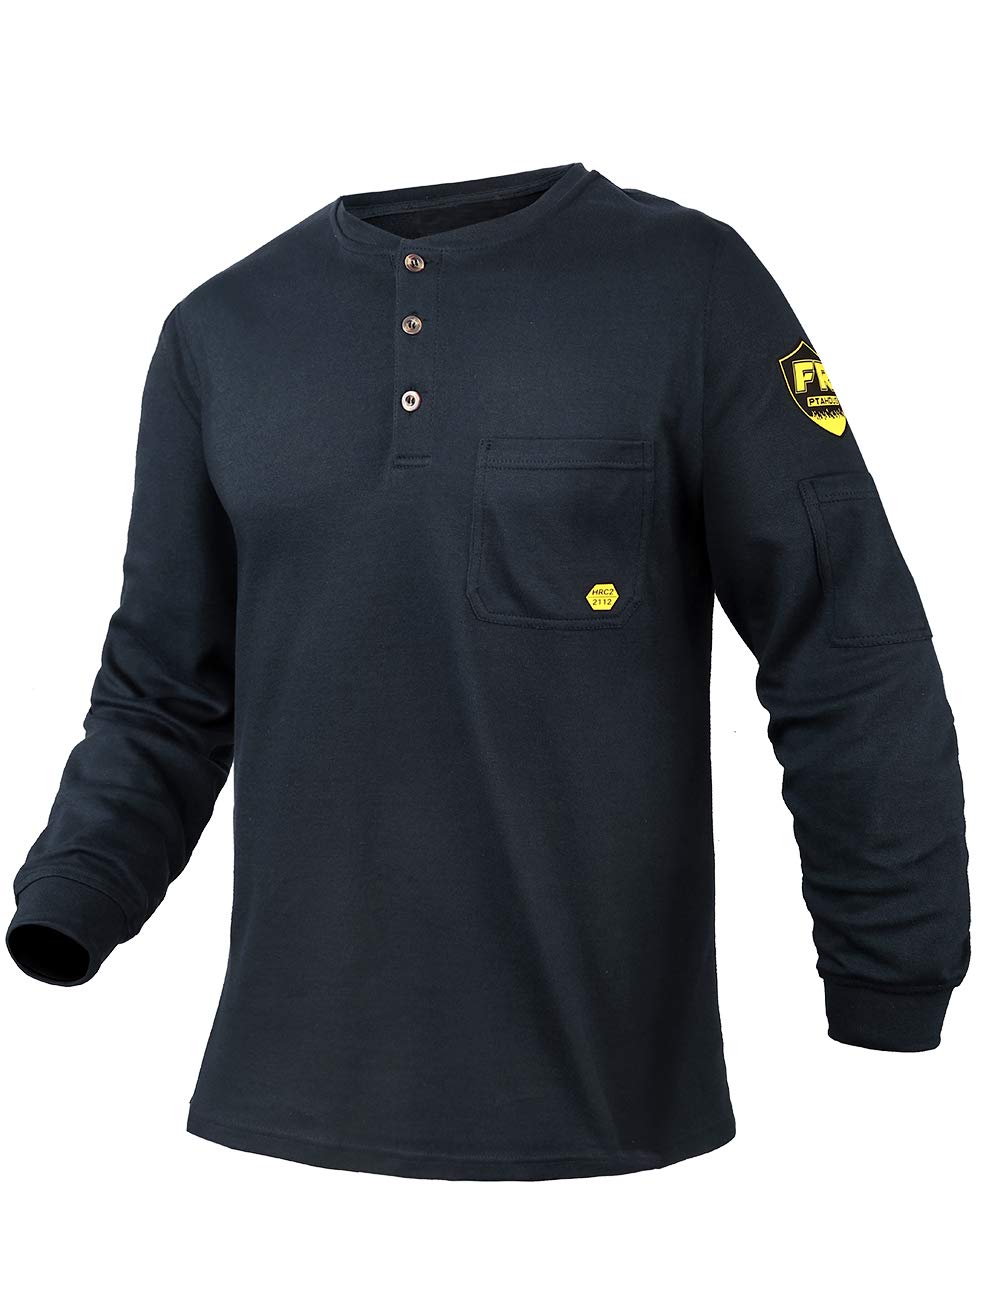 PTAHDUS FR Shirts Men’s Flame Resistant Long Sleeve Henley Shirts, 7.1 Ounce 100% Cotton FR Workwear Clothing for Men